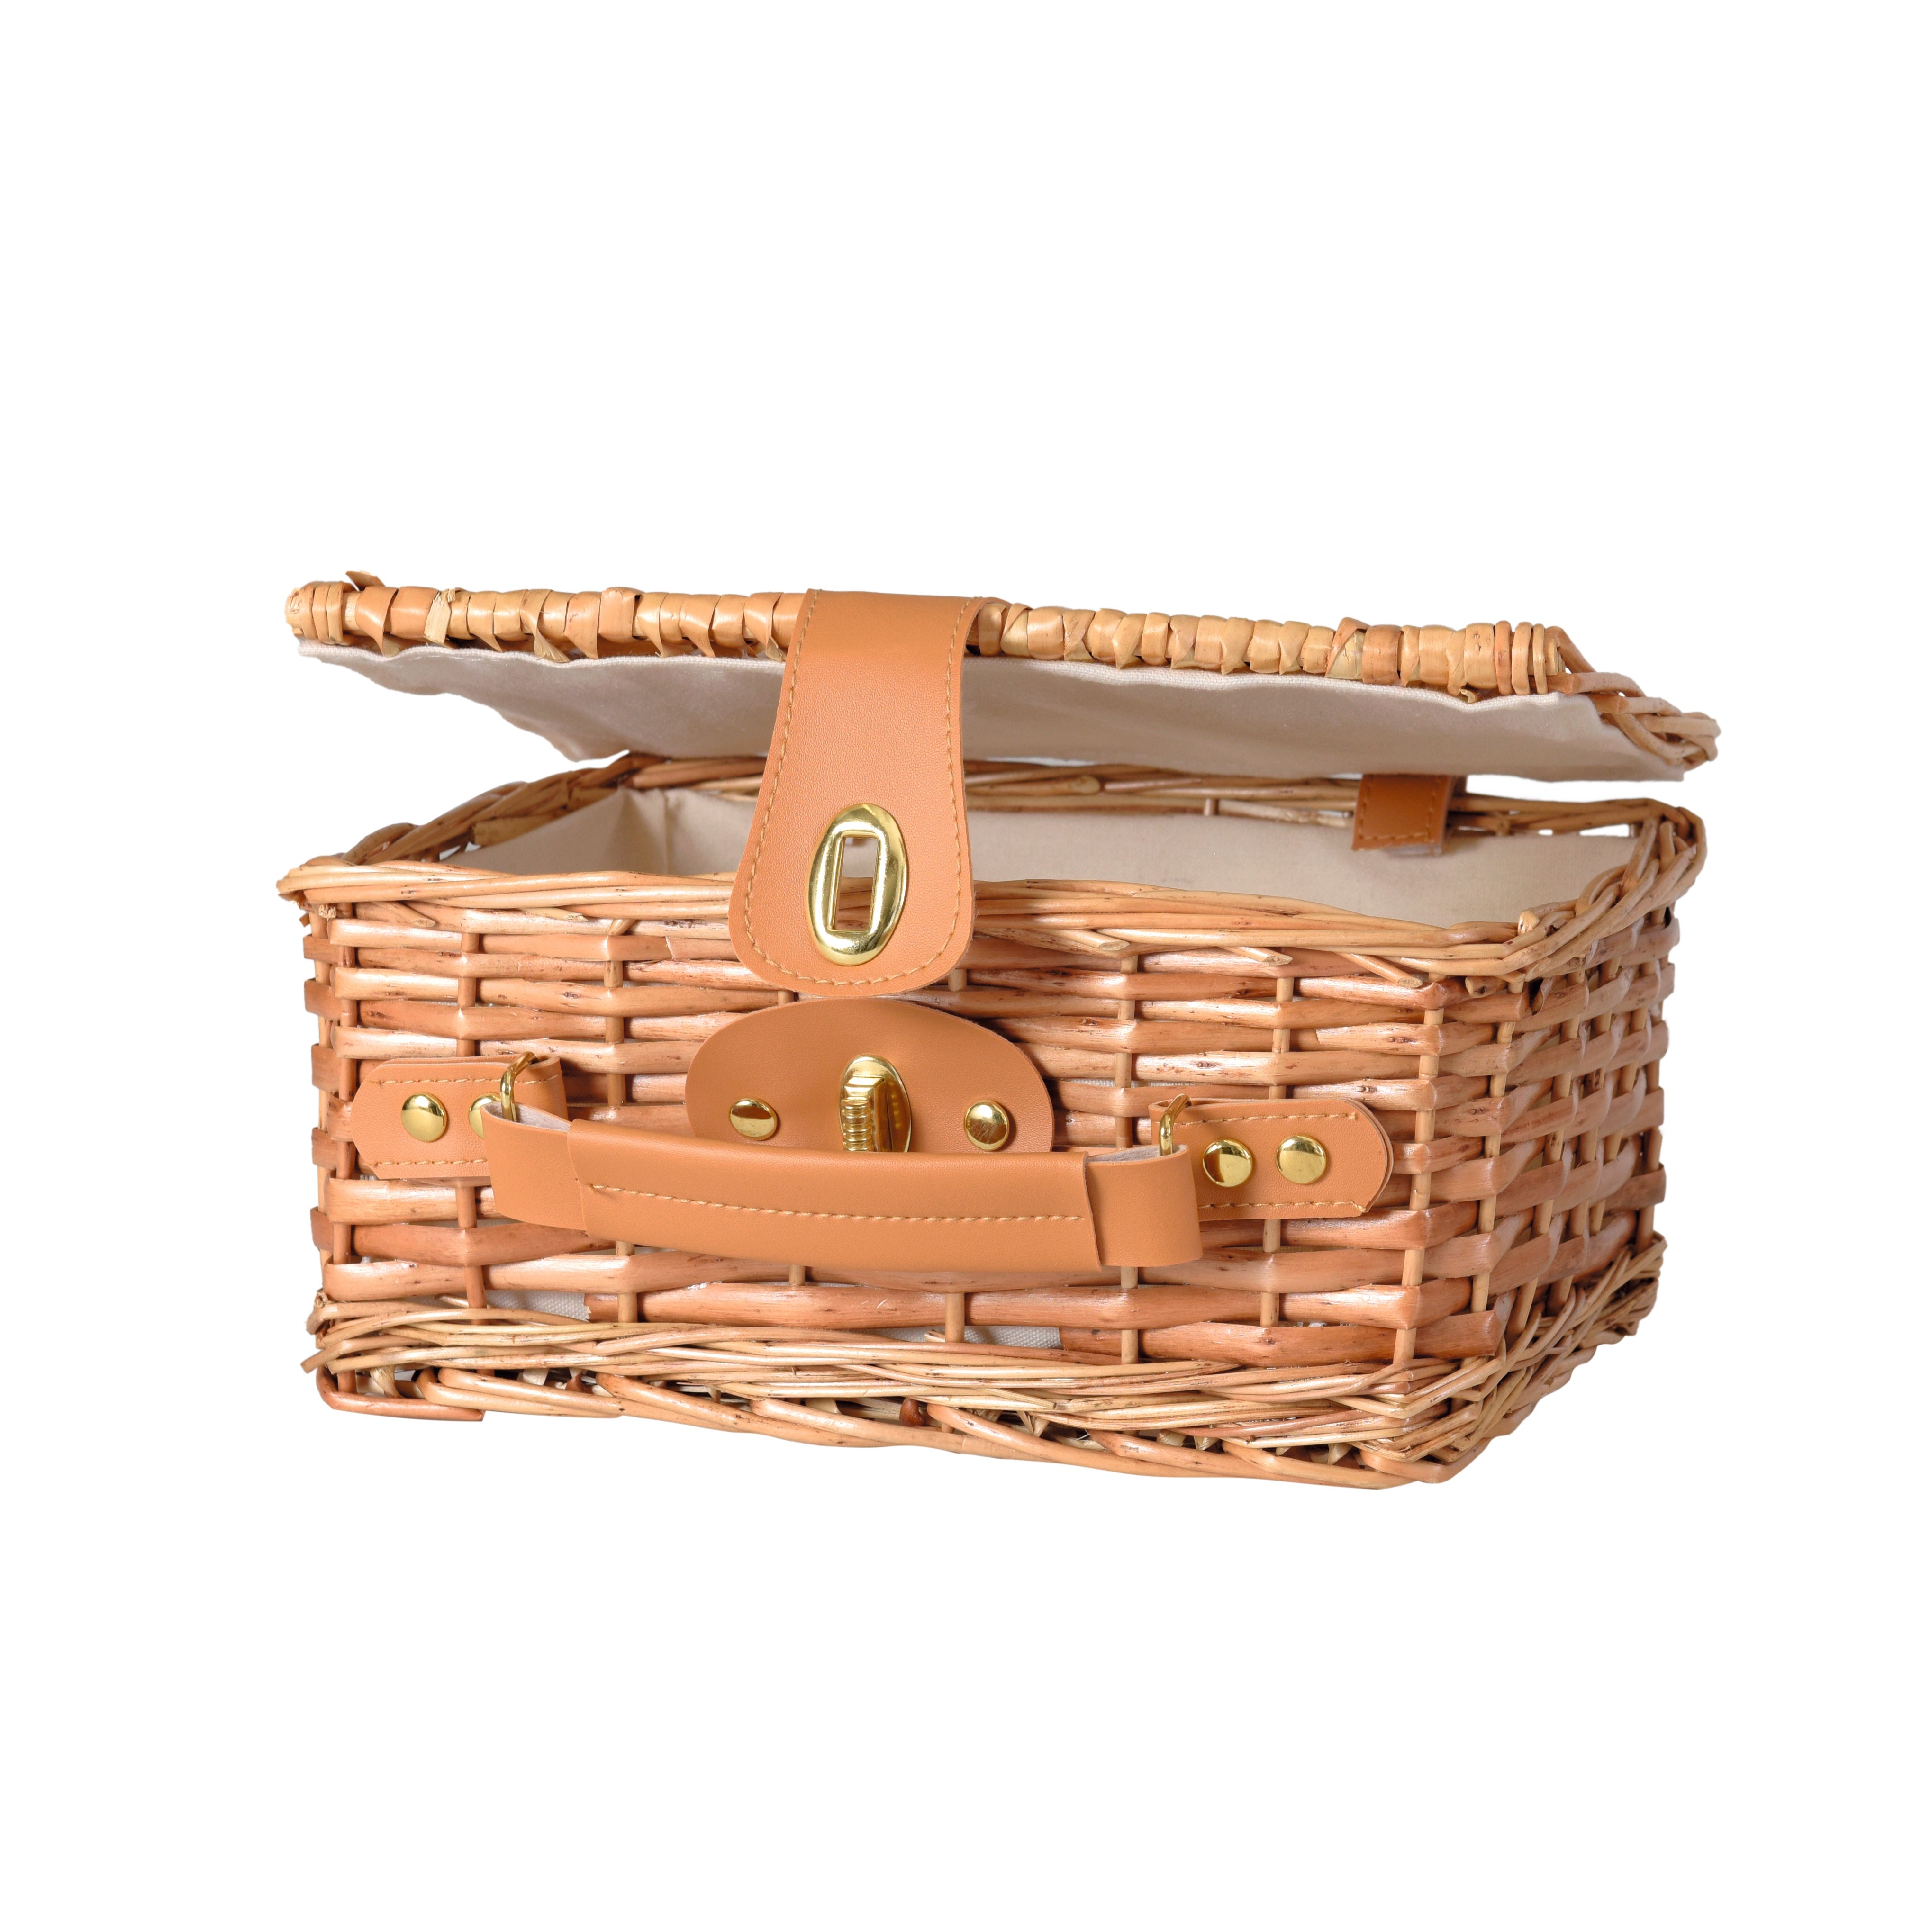 Egmont Les Petits by Wicker Case With Cotton Fabric Pretend Play